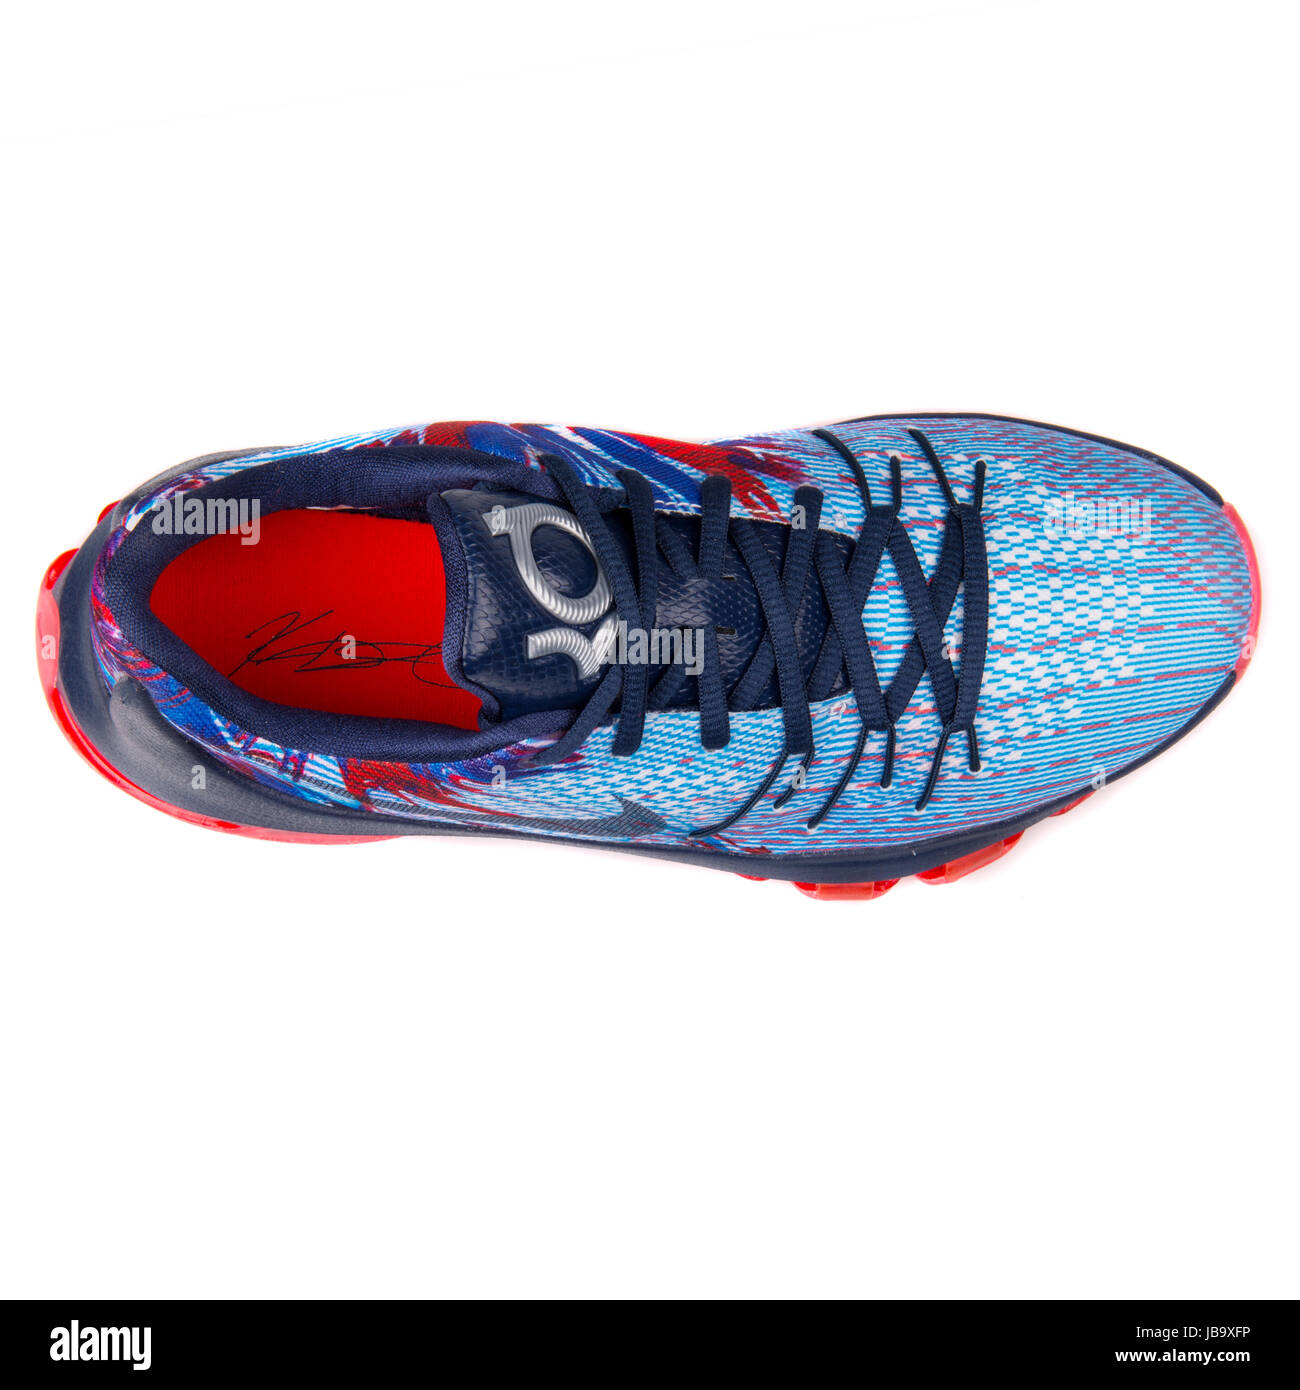 Nike KD 8 (GS) Navy Blue, Light Blue and Red Youth's Basketball Shoes -  768867-446 Stock Photo - Alamy